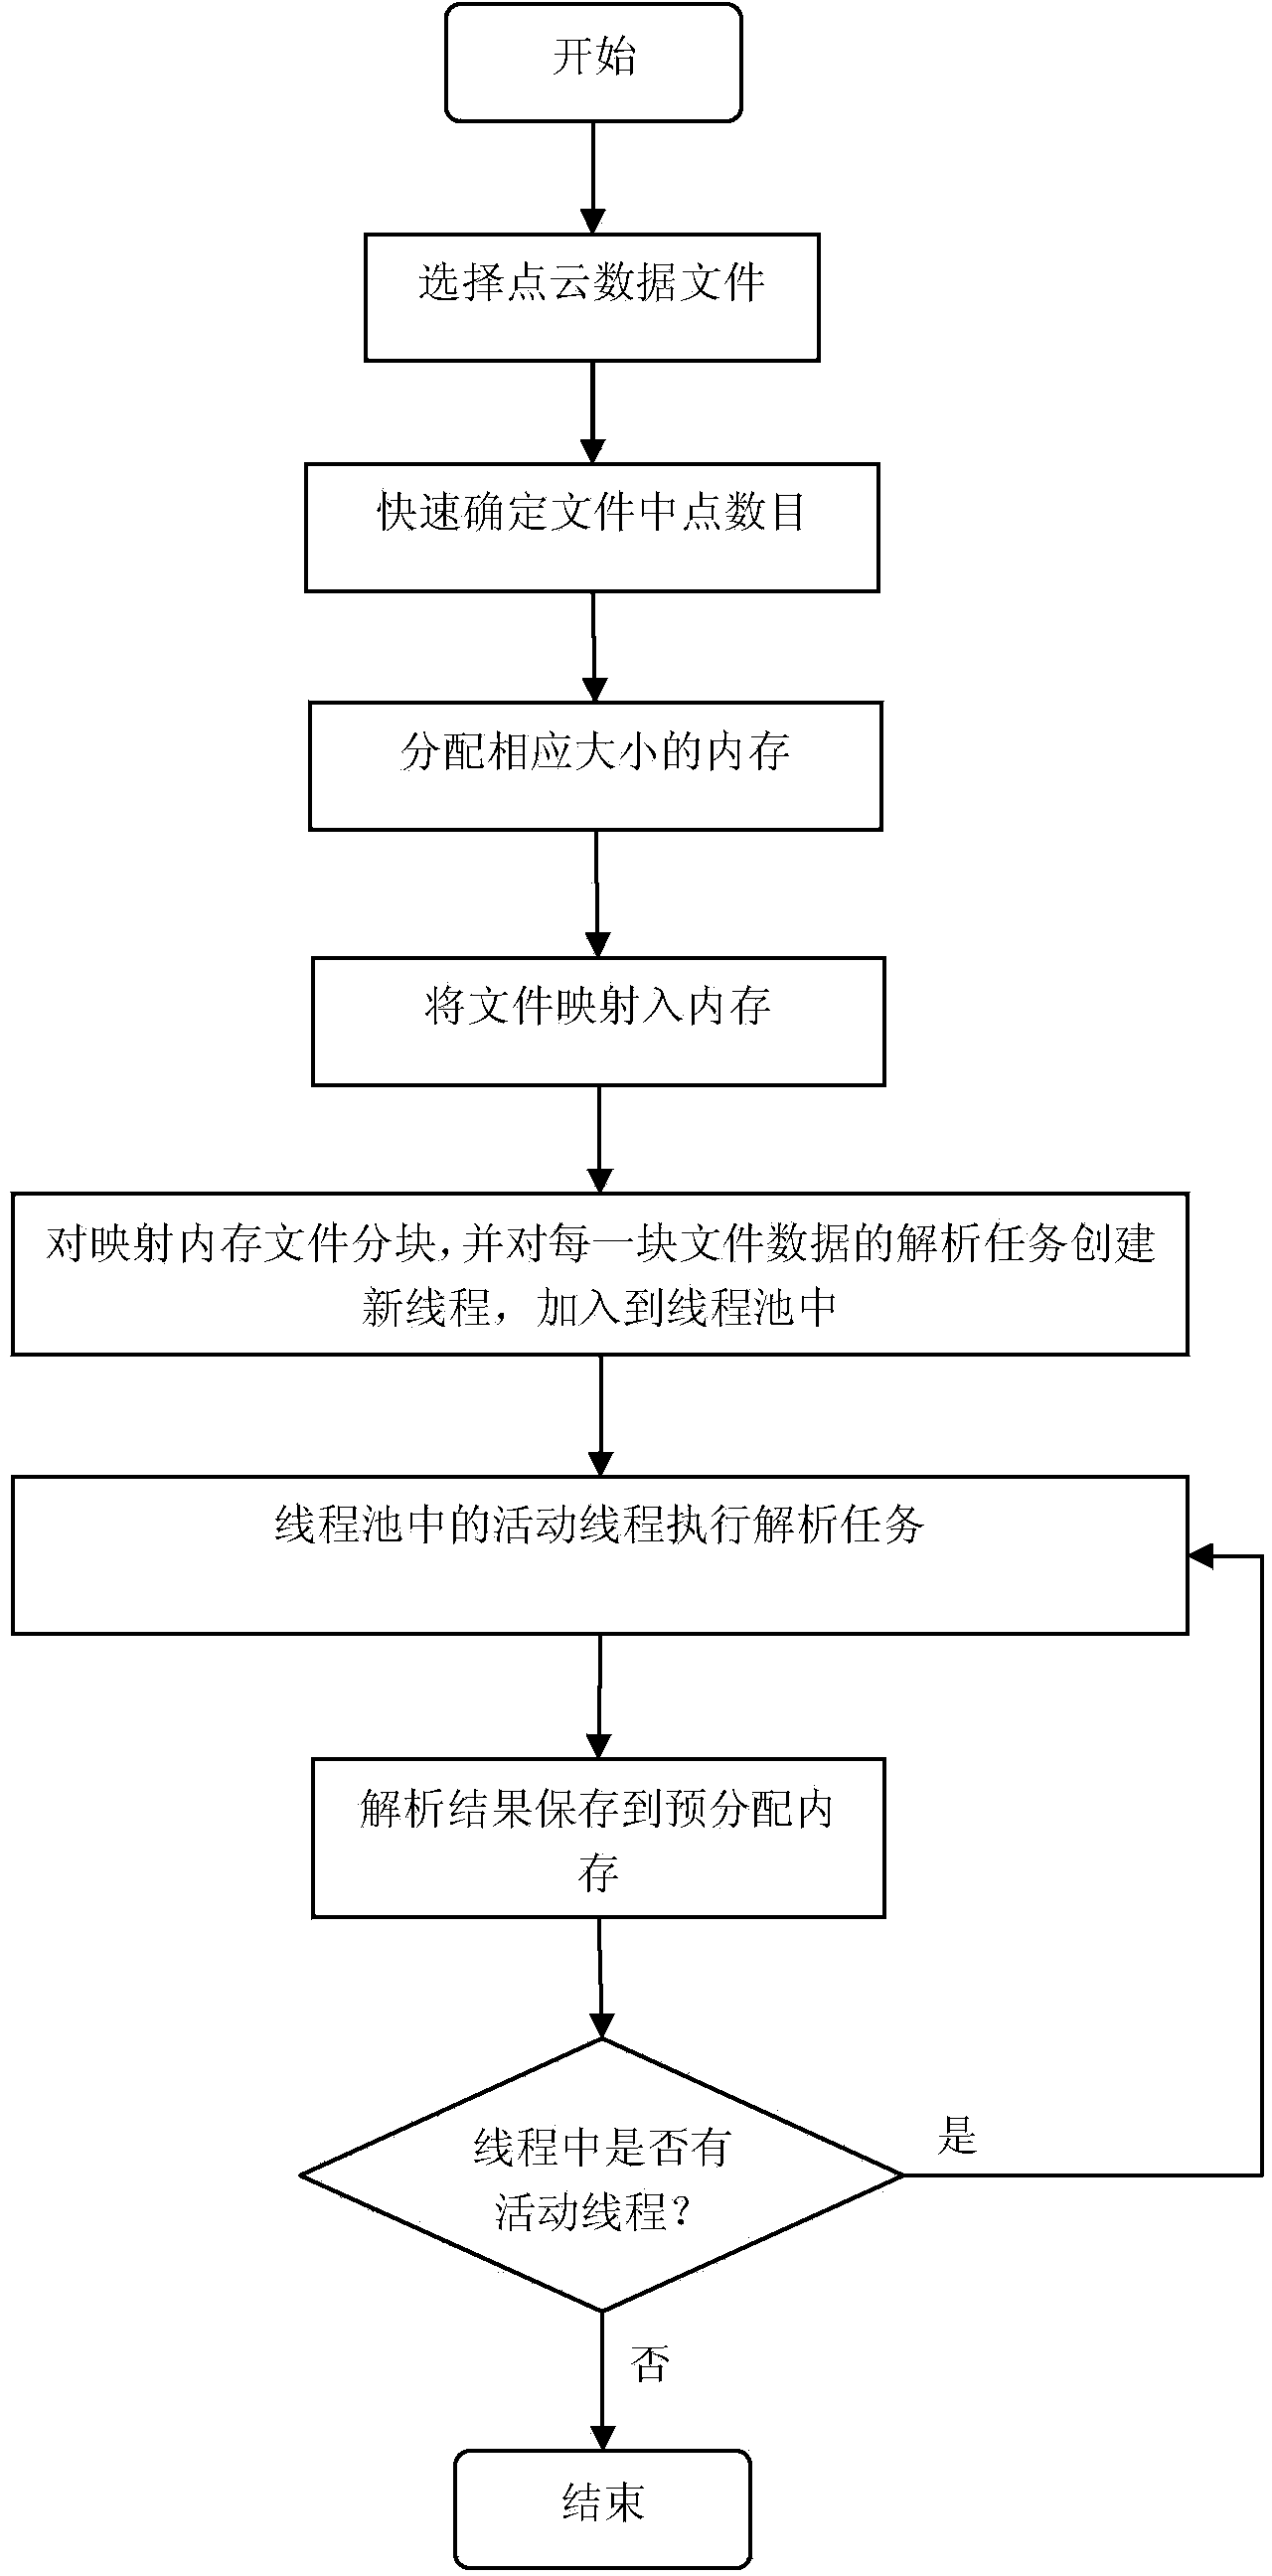 Rapid large-scale point-cloud data reading method based on memory pre-distribution and multi-point writing technology